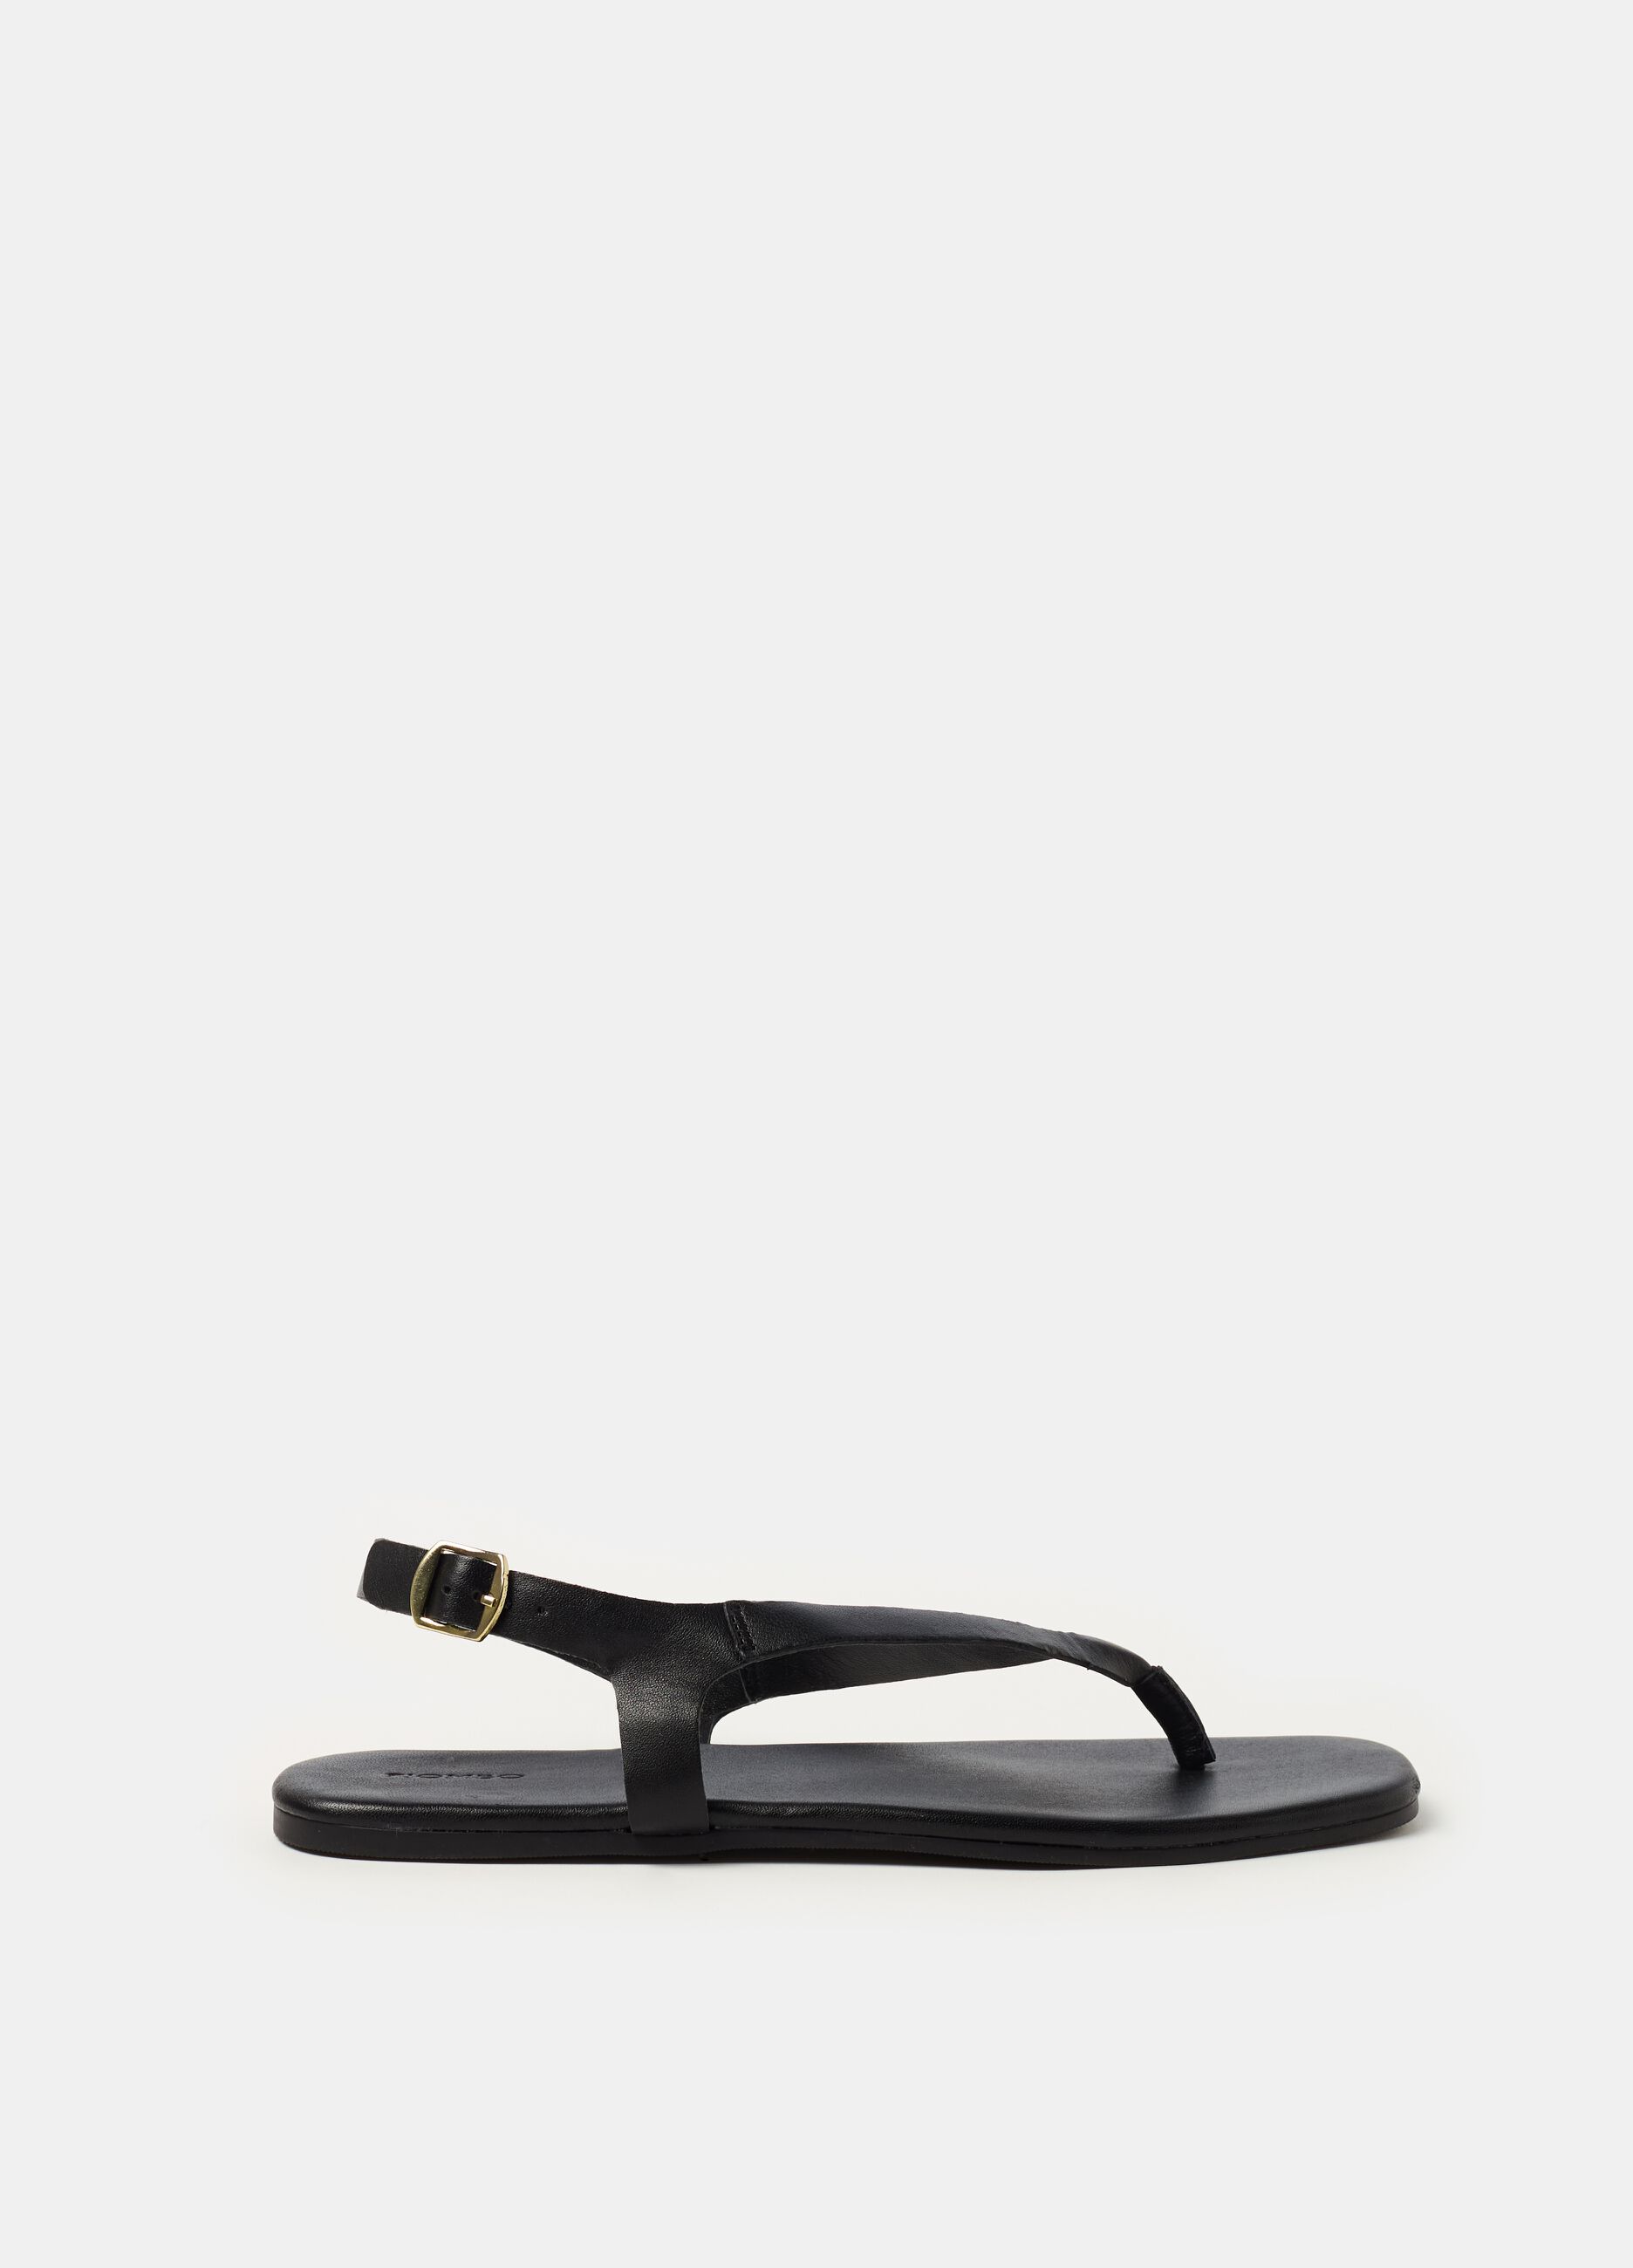 Contemporary thong sandals in leather